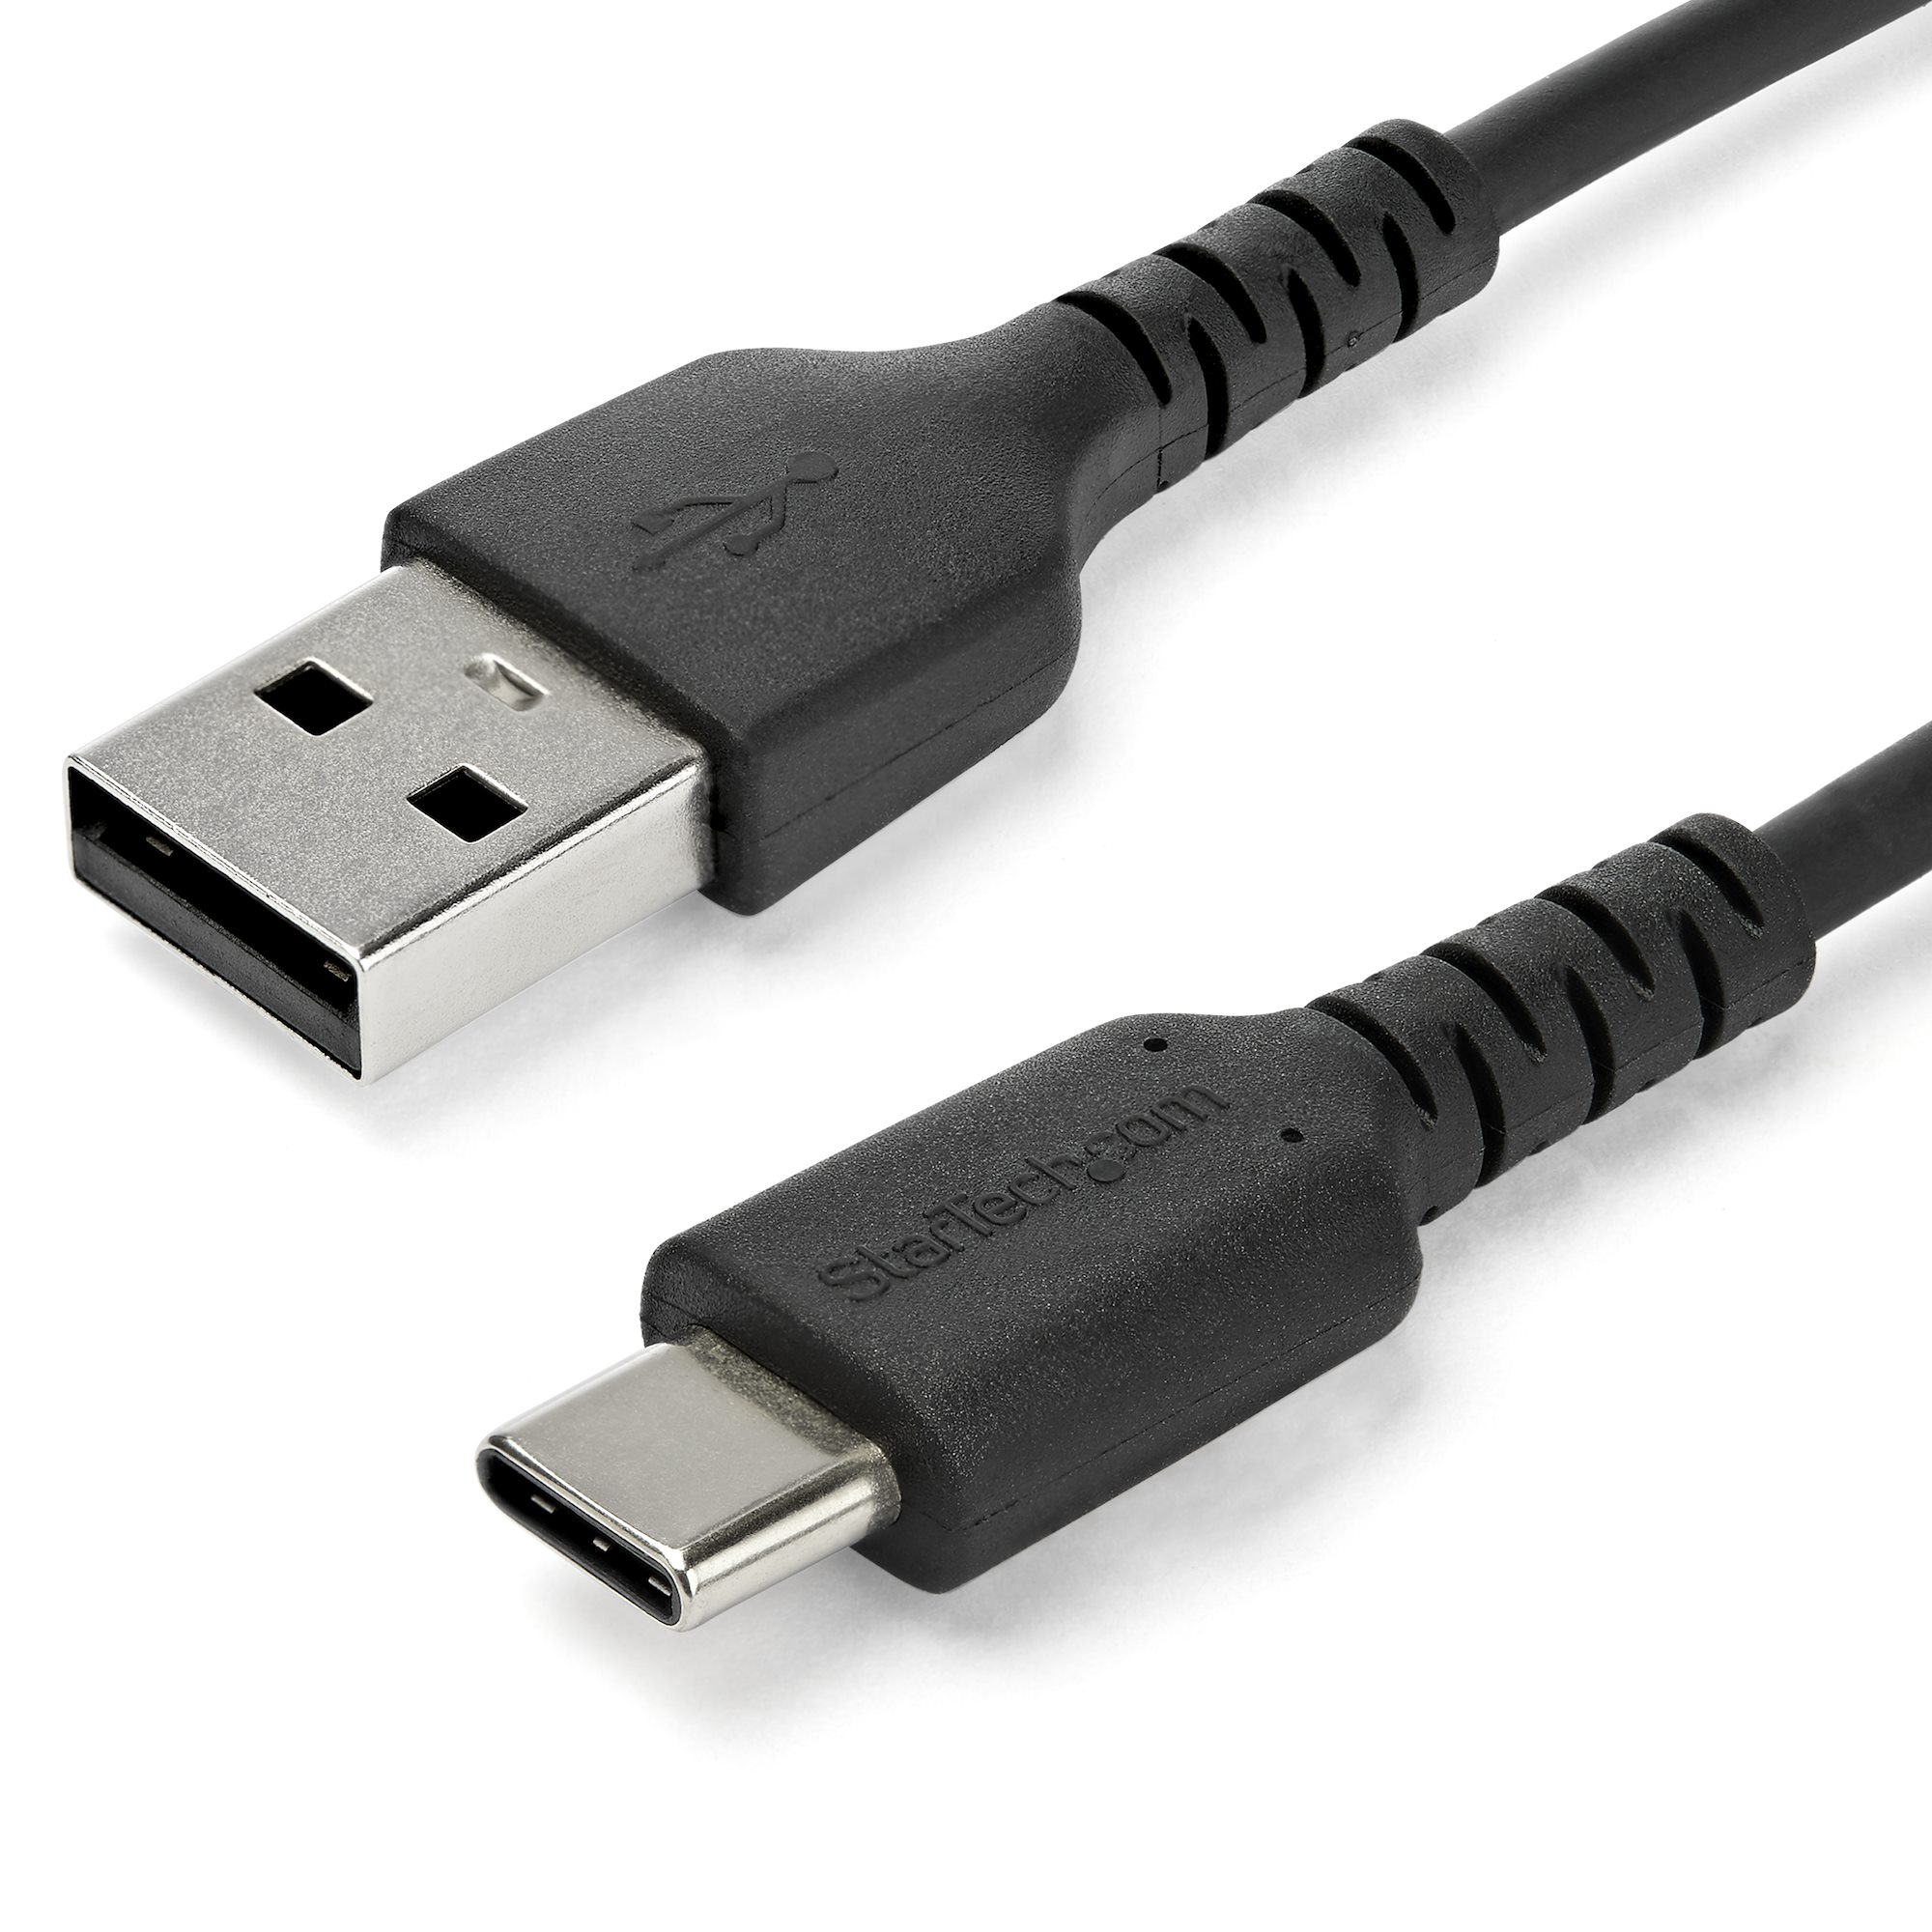 2m USB A to USB C Charging Cable Durable - USB-C Cables | Singapore